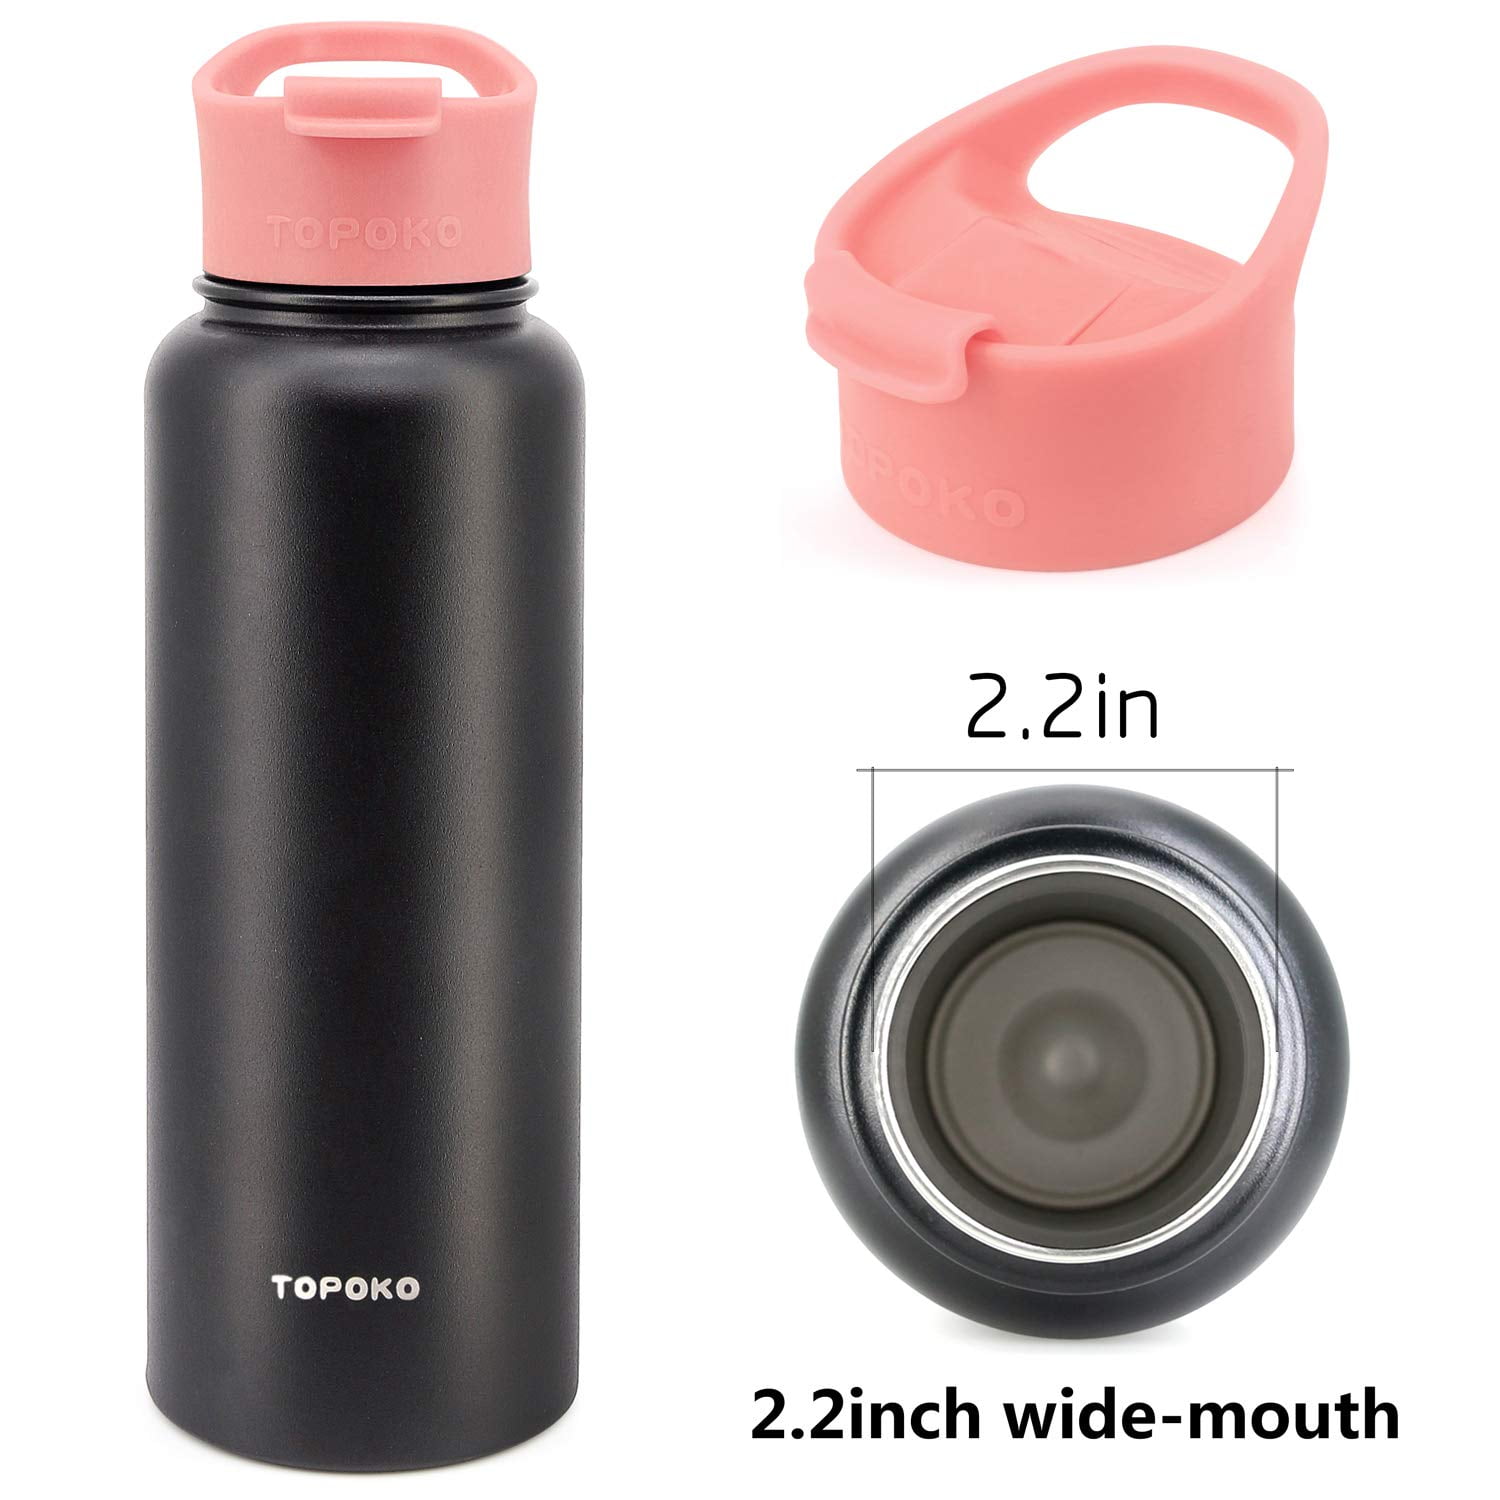 Tzuoieo Flip lid for Hydro Flask Wide Mouth 32 40 oz with Flexible Handle,  Replacement Coffee Lid Compatible with Hydroflask, Nalgene, and More Top  Water Bottle Brands Wide Mouth 32 oz 40 oz black